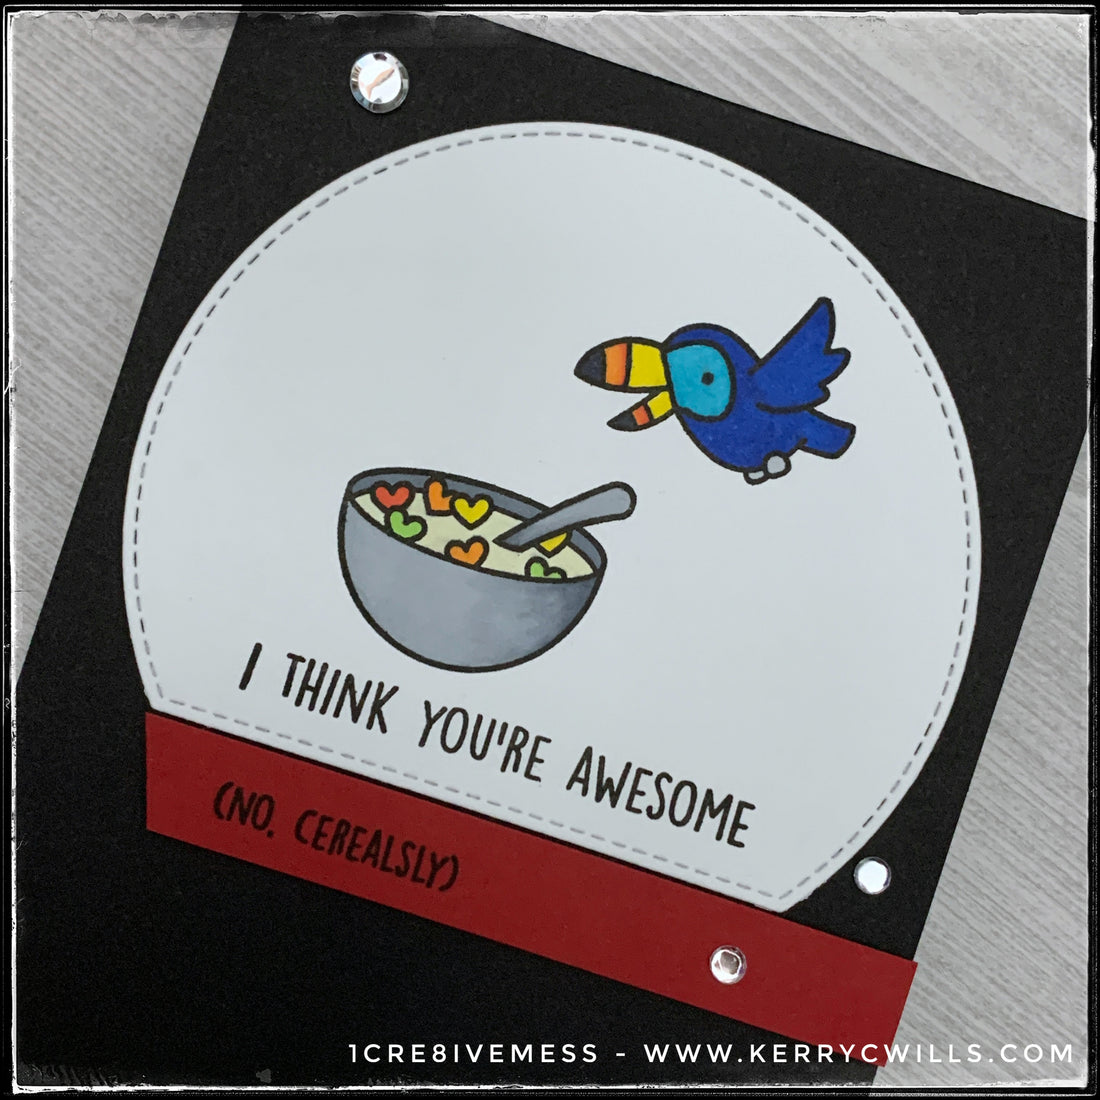 #the100dayproject : 2022 : 28/100 - you're awesome [cerealsly]